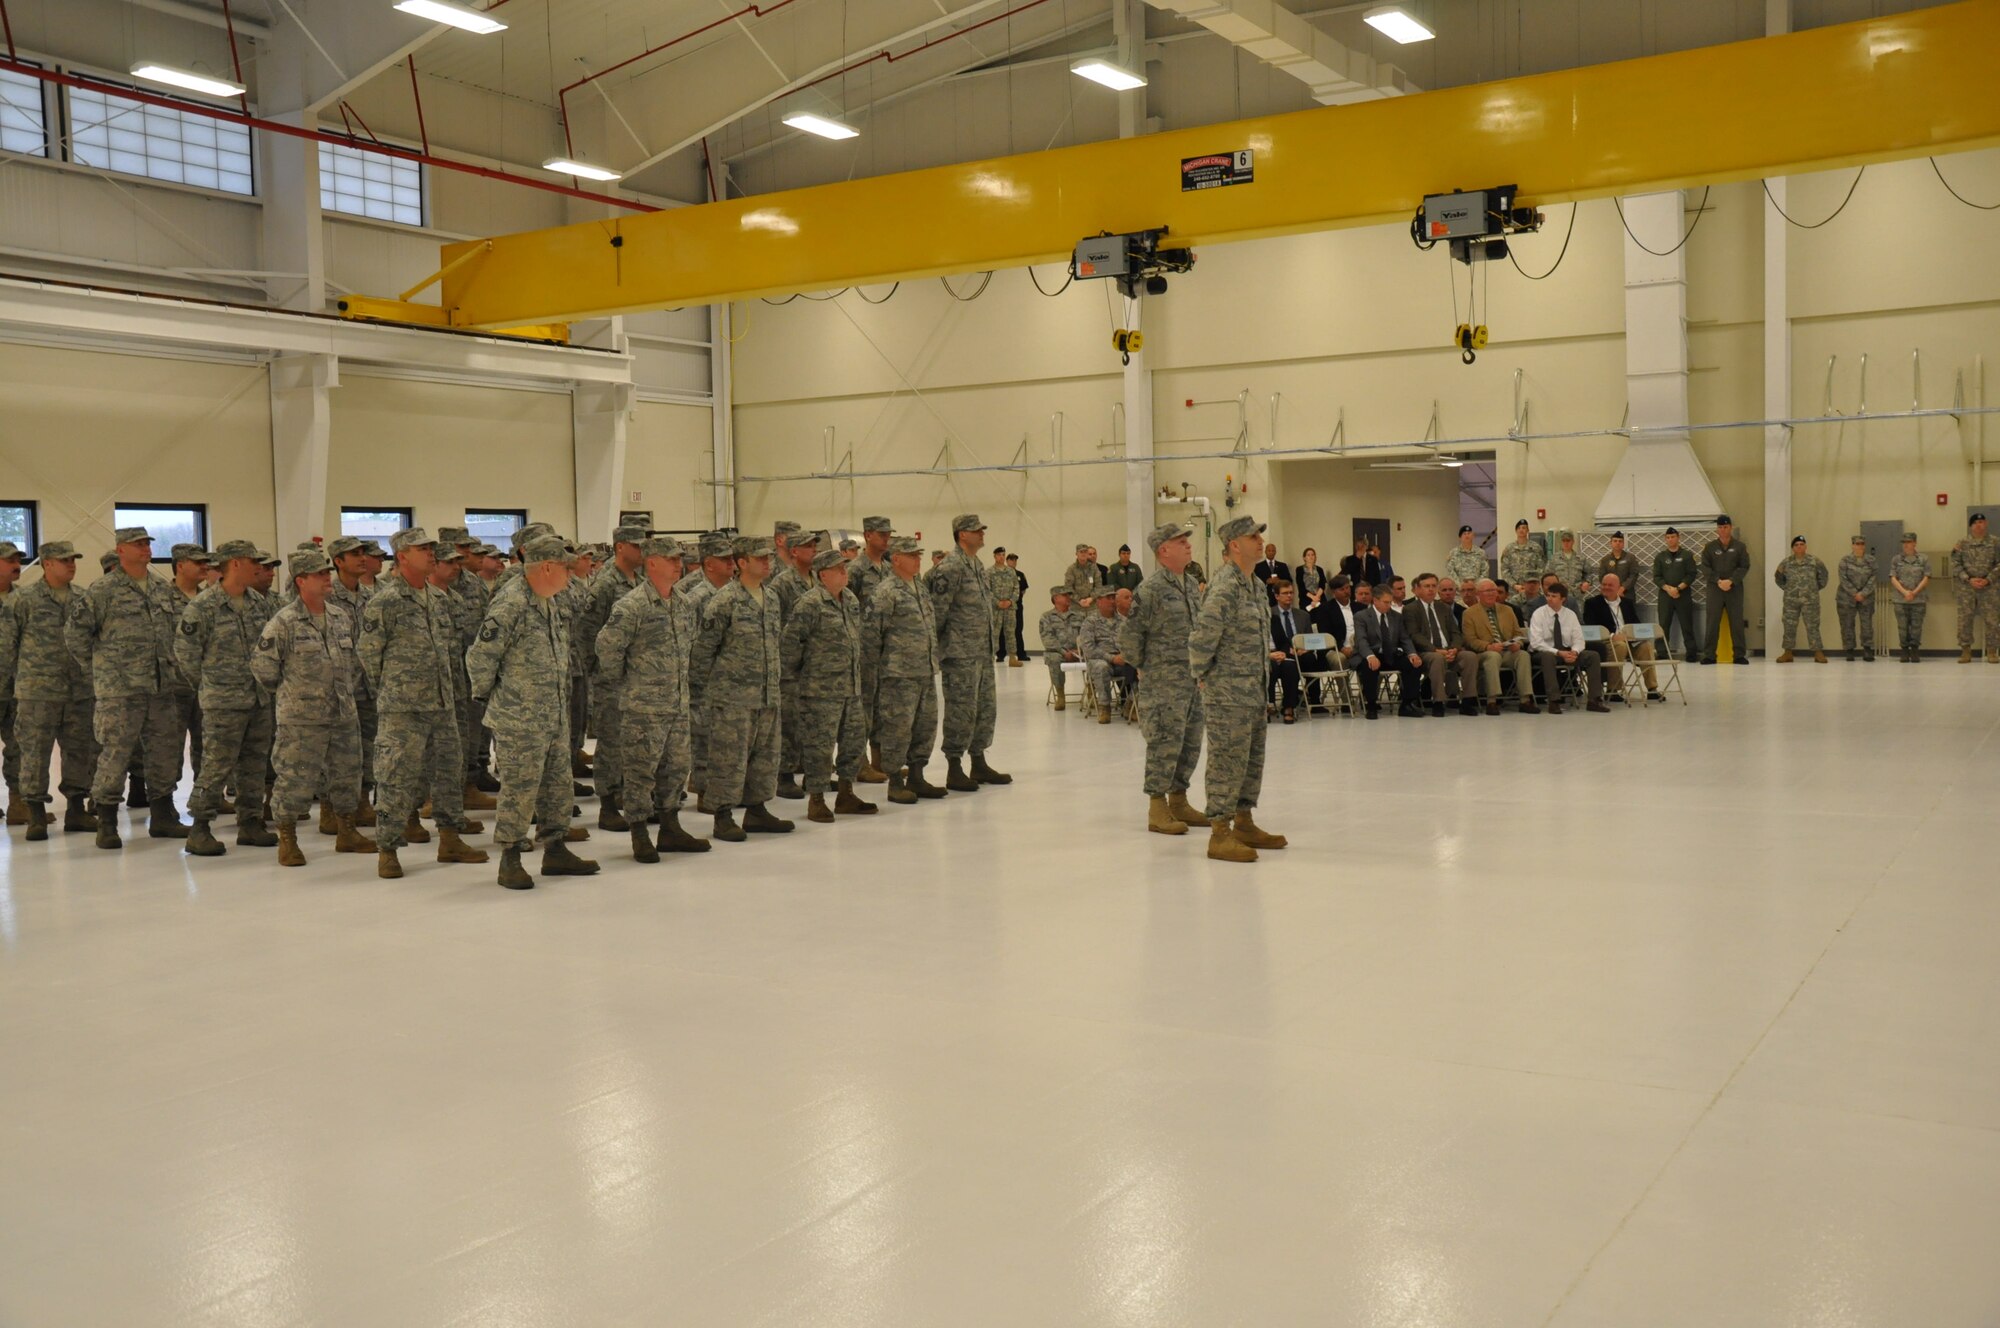 A formation of members from the Connecticut Air National Guard's 103rd Maintenance Group and seated guests look on during a ribbon cutting ceremony April 28, 2011, to mark the official opening of the Centralized Repair Facility at Bradley Air National Guard Base, East Granby, Conn. (Photo by Sgt. 1st Class Debbi Newton, State Public Affairs NCO)